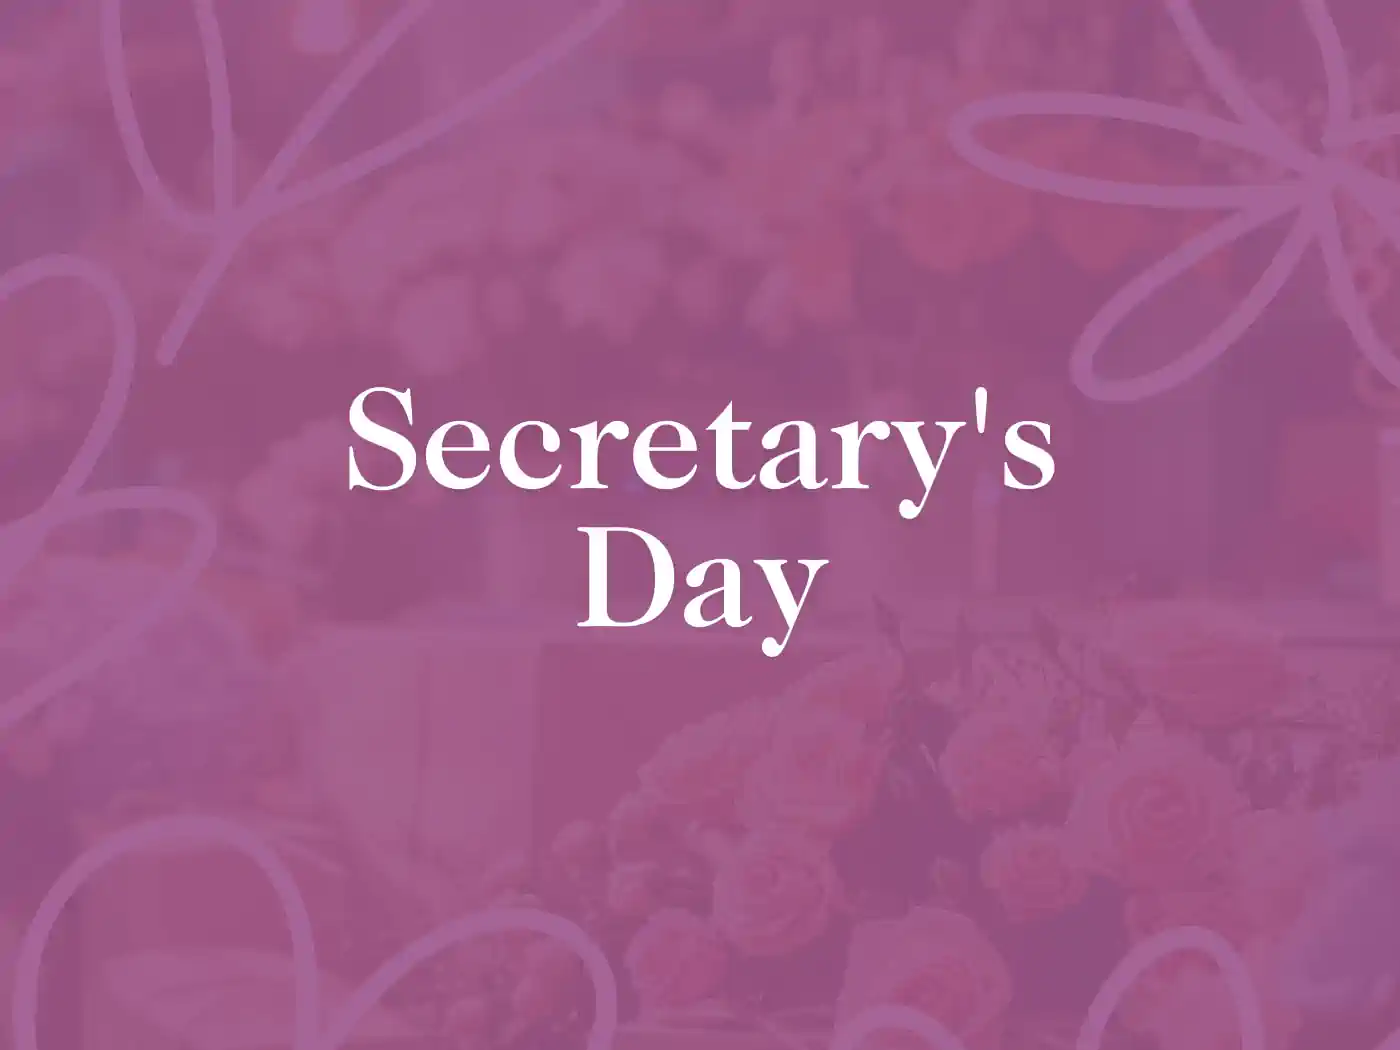 Elegant floral background with the text 'Secretary's Day' or secretaries day celebrating administrative professionals, accented with soft pink and purple hues. Fabulous Flowers and Gifts - Delivered with Heart.